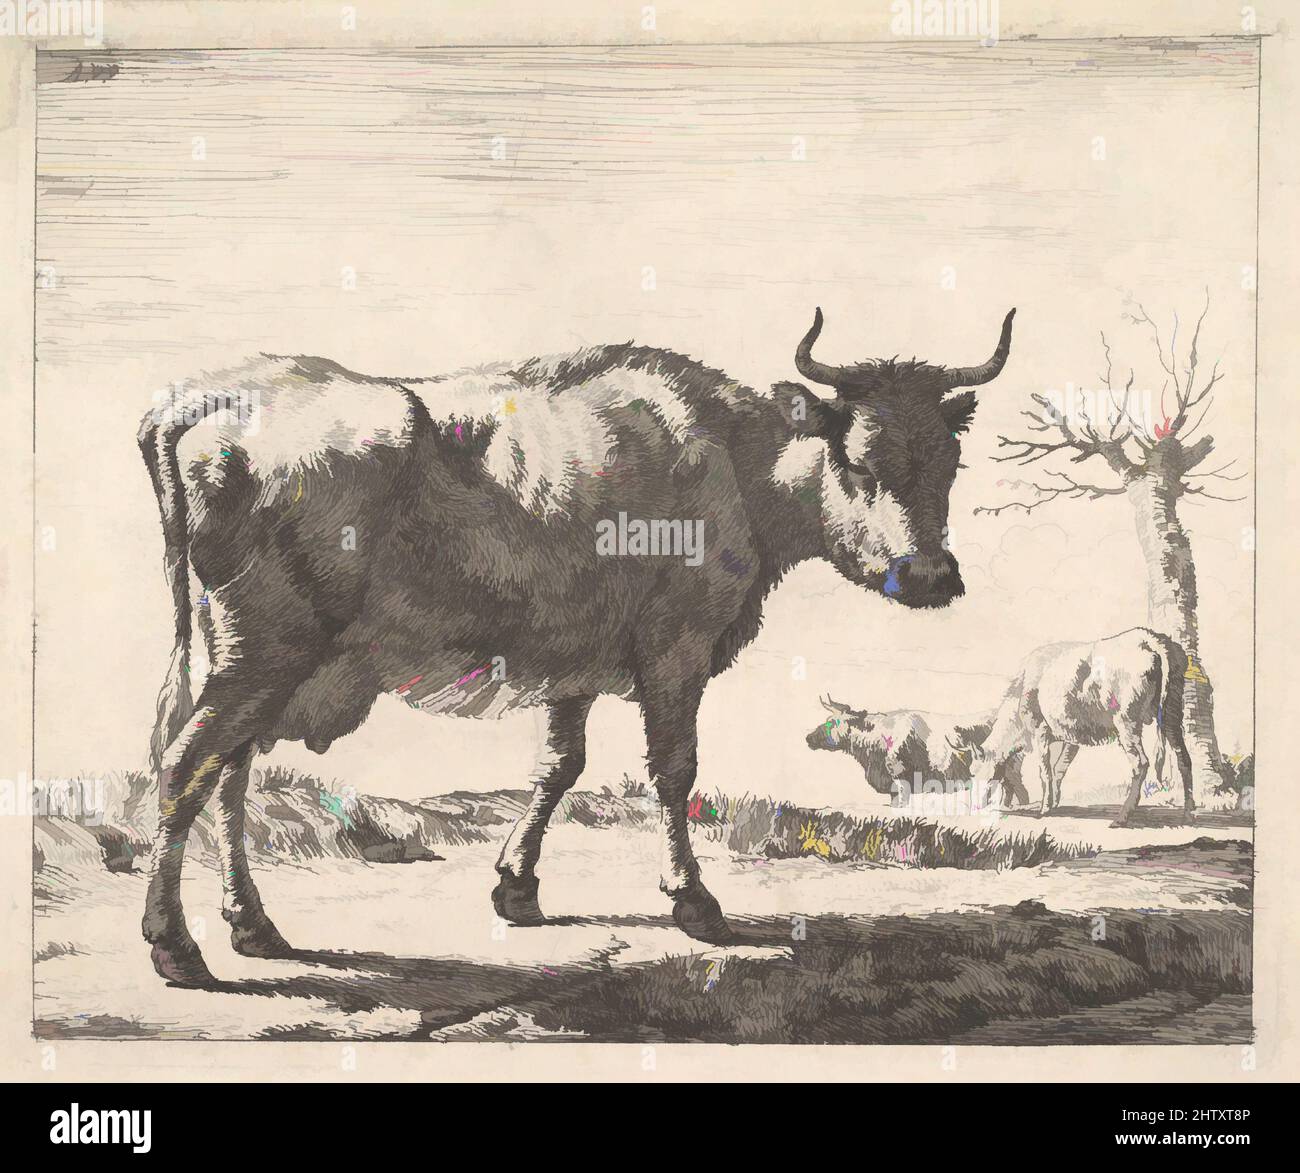 Art inspired by Three Cows, Etching, plate: 4 1/2 x 5 7/16 in. (11.5 x 13.8 cm), Prints, Adriaen van de Velde (Dutch, Amsterdam 1636–1672 Amsterdam, Classic works modernized by Artotop with a splash of modernity. Shapes, color and value, eye-catching visual impact on art. Emotions through freedom of artworks in a contemporary way. A timeless message pursuing a wildly creative new direction. Artists turning to the digital medium and creating the Artotop NFT Stock Photo